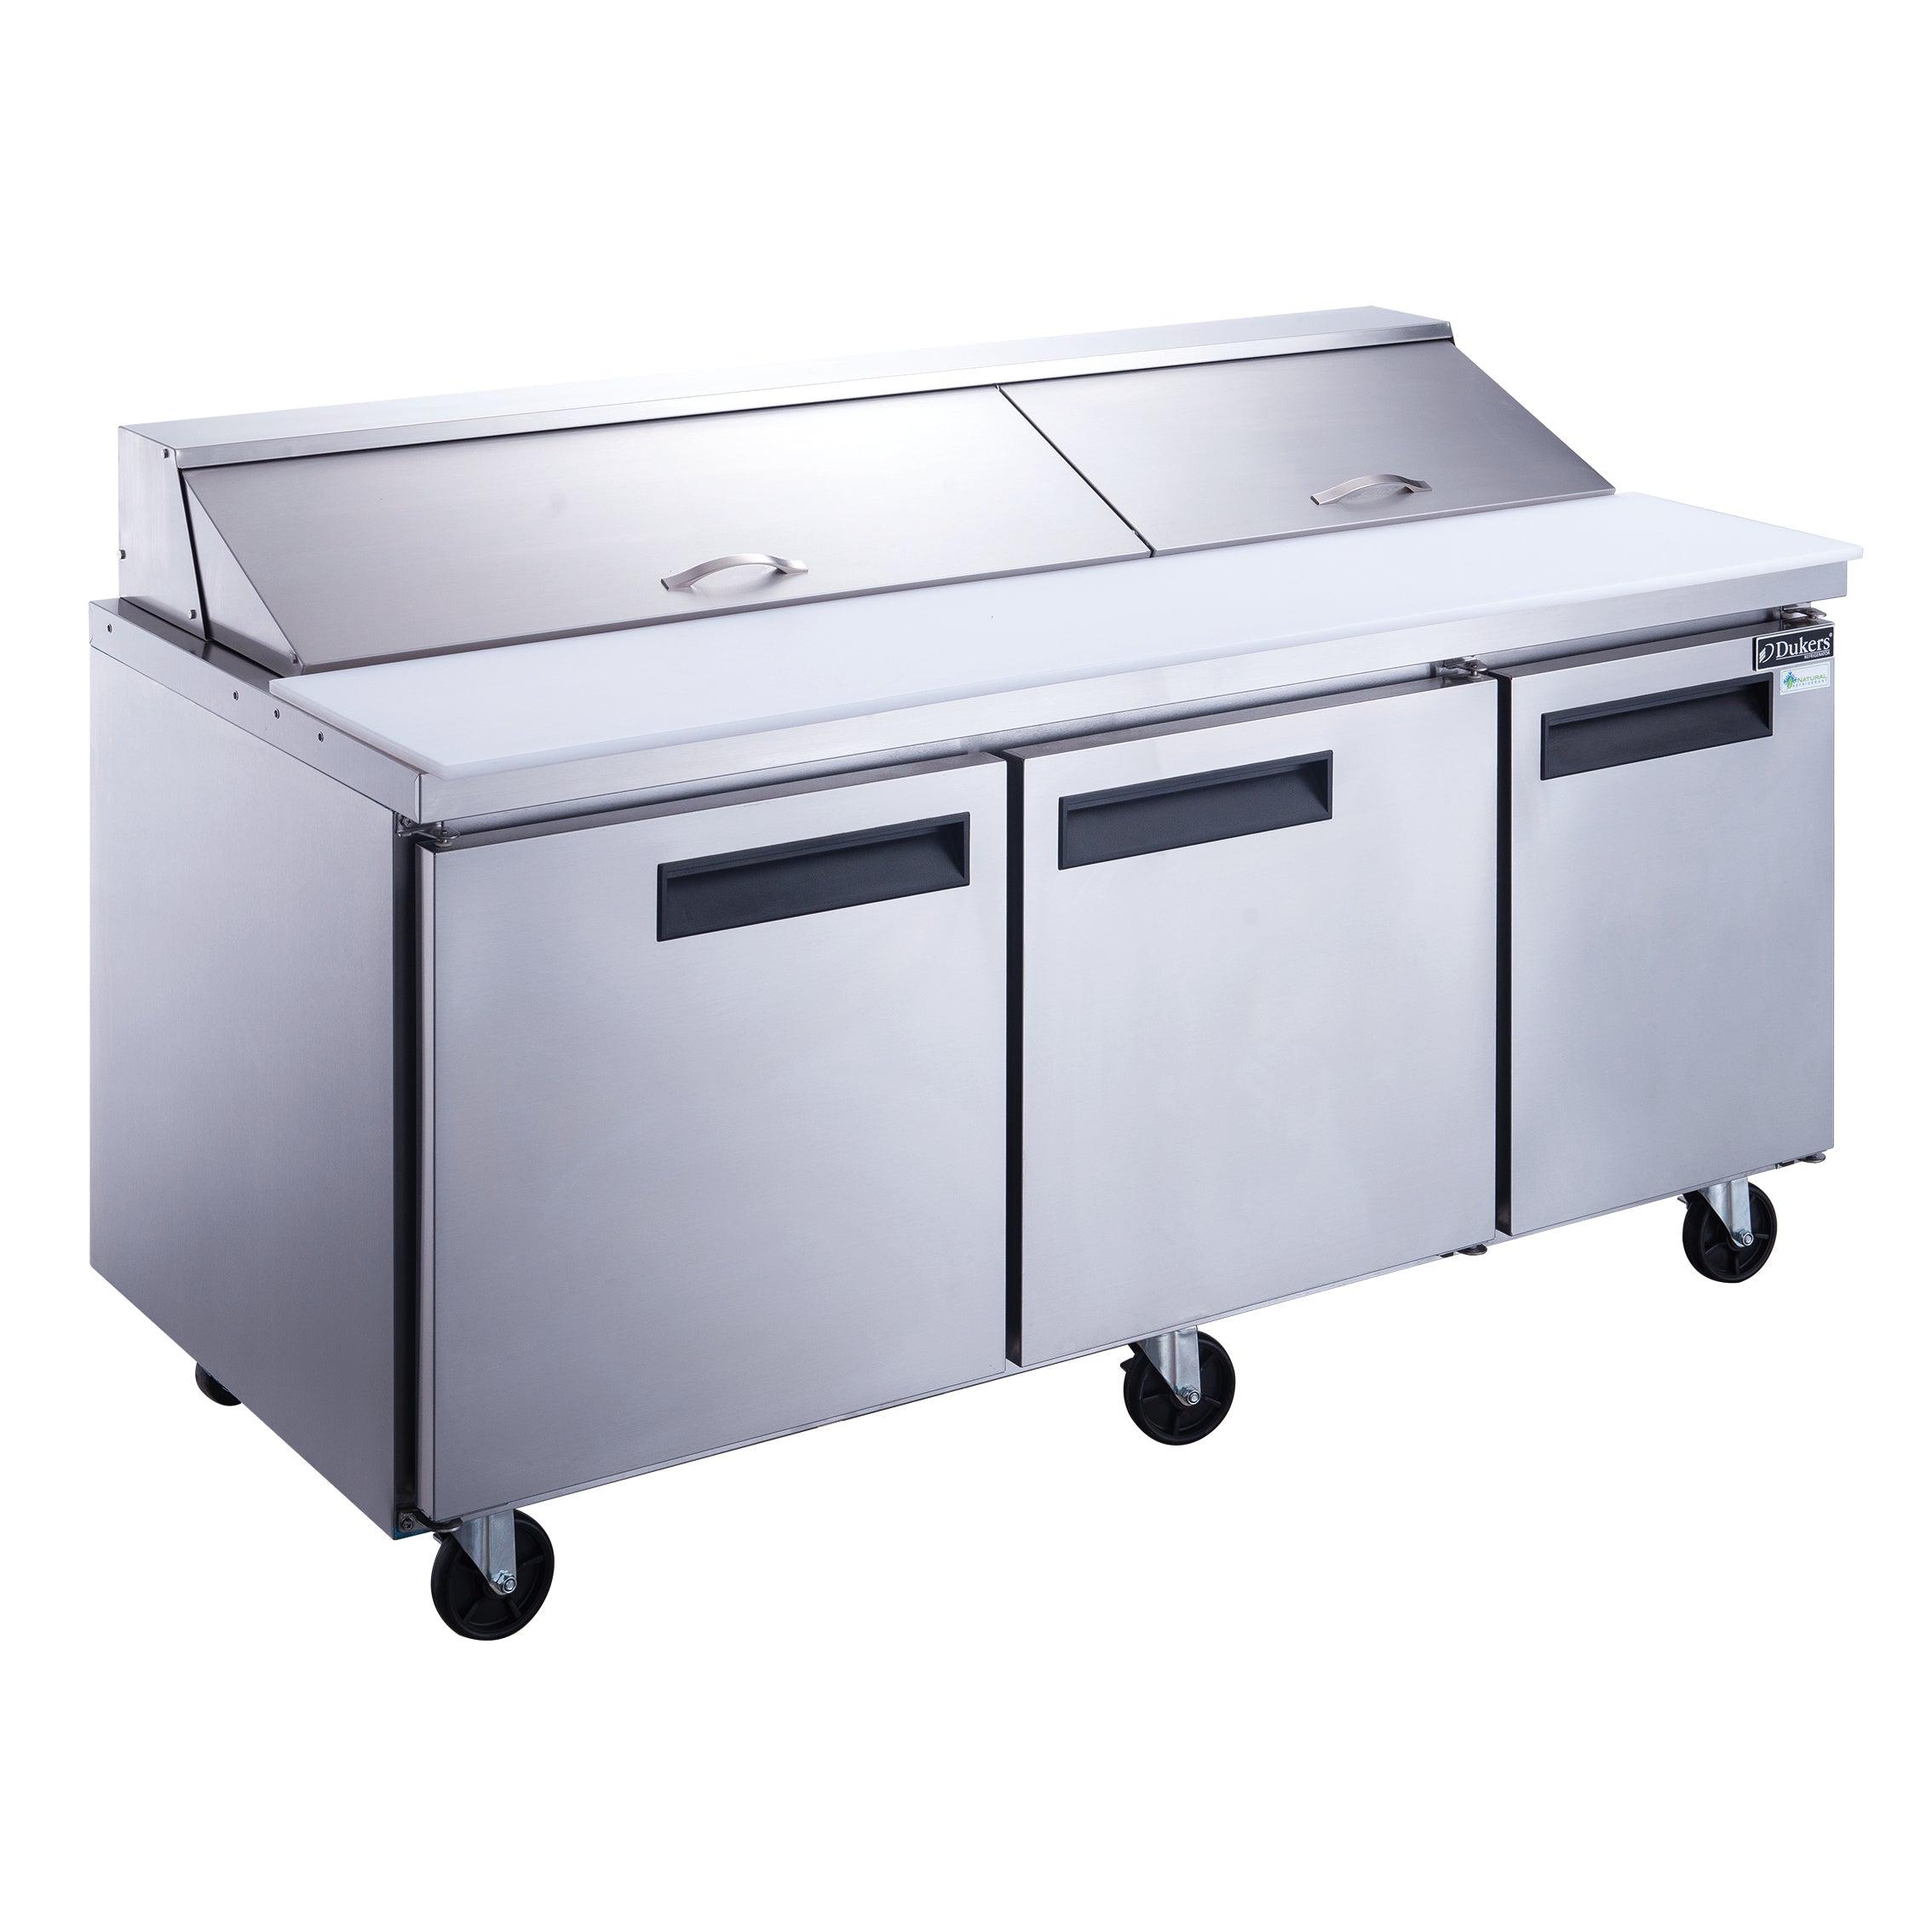 Dukers - DSP72-18-S3 72" 3-Door Commercial Food Prep Table Refrigerator in Stainless Steel